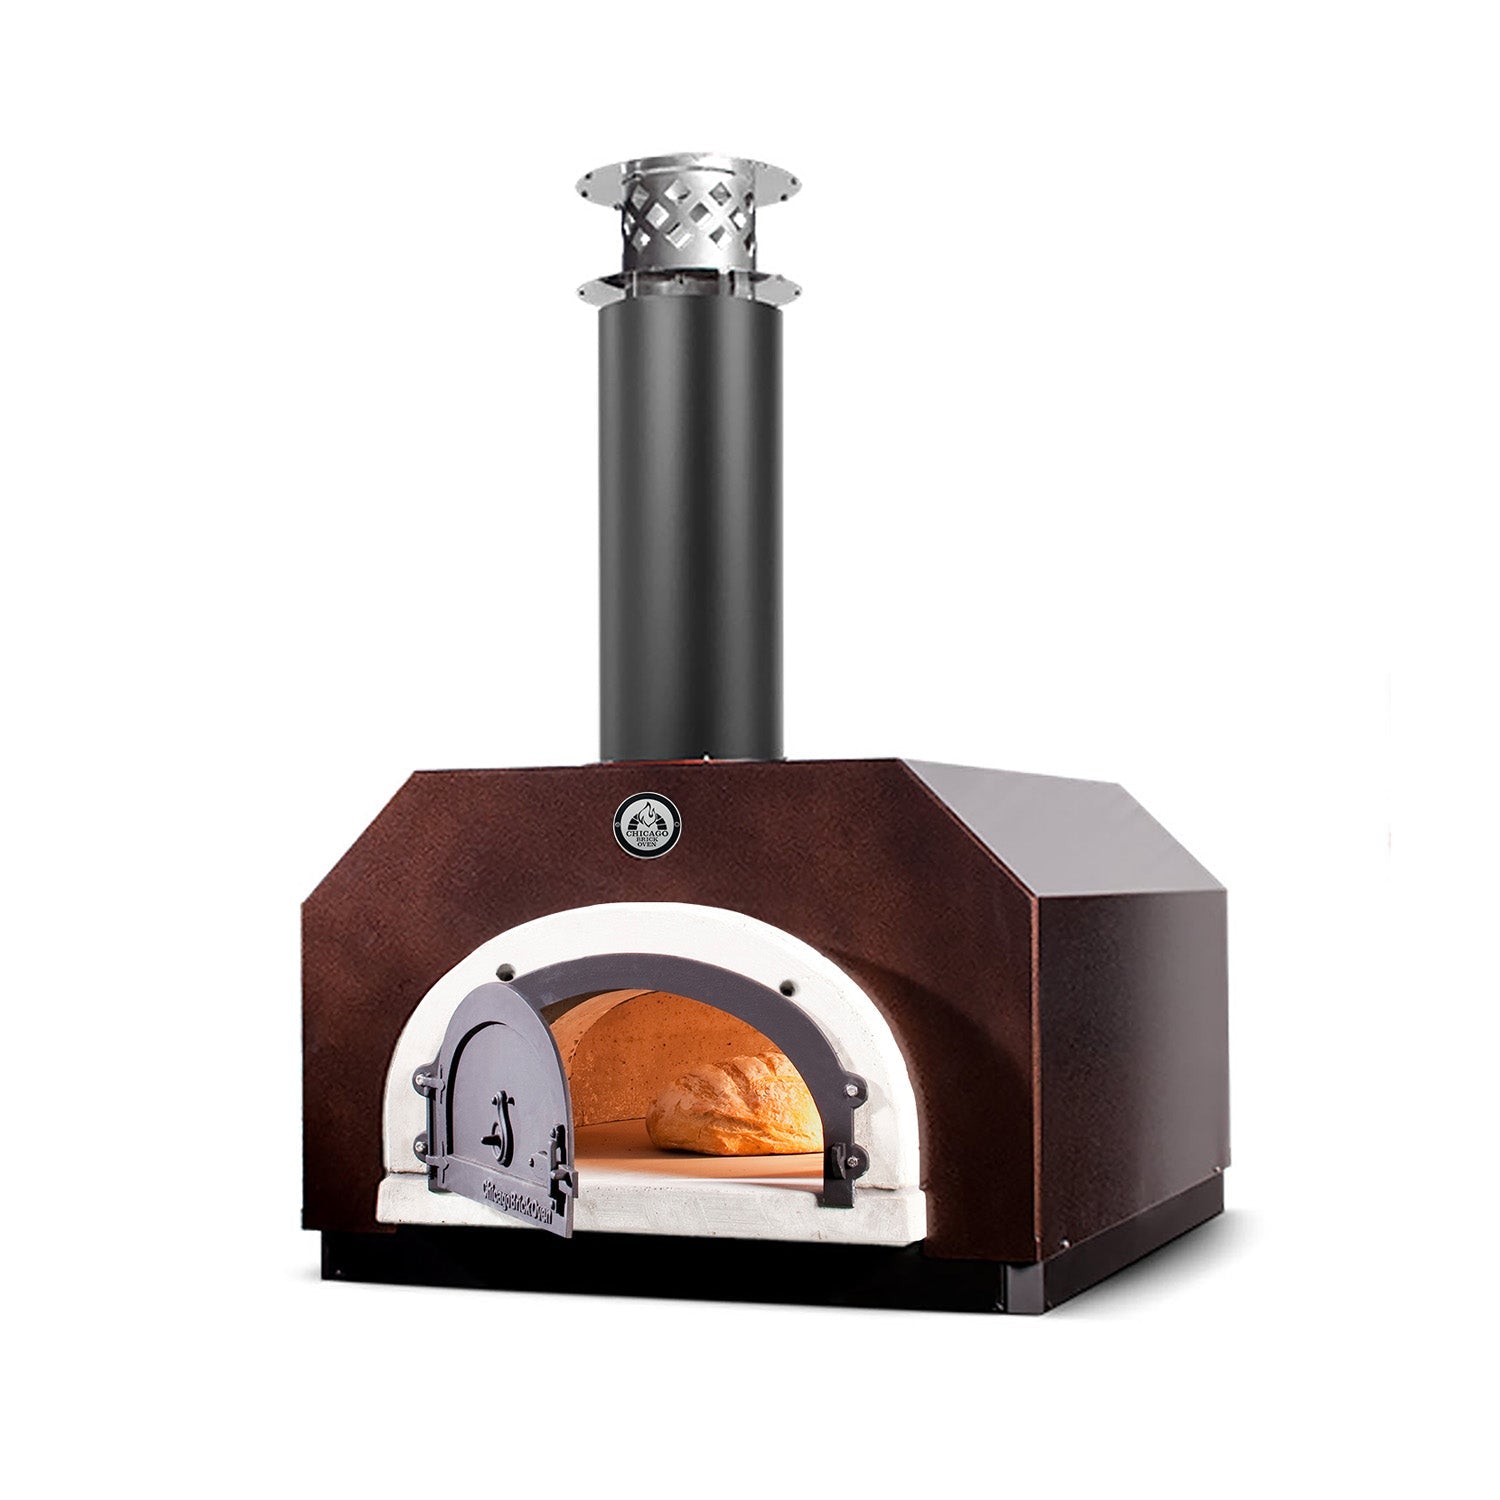 Chicago Brick Oven 500 Countertop | Wood Fired Pizza Oven | 27" x 22" Cooking Surface